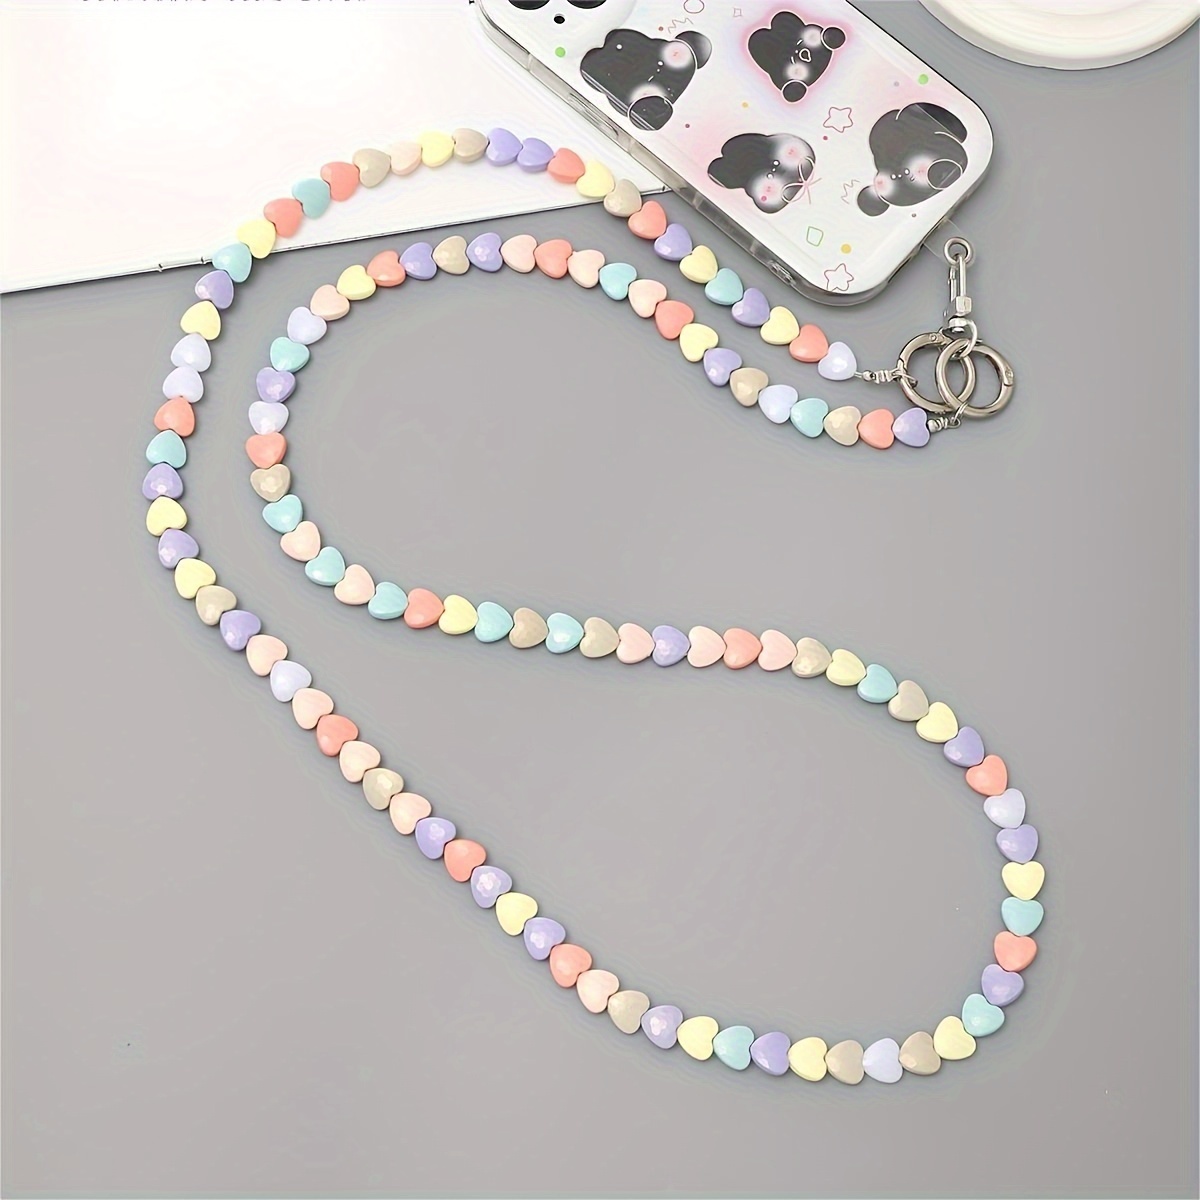 

Multicolored Heart Beaded Slant Cross Chain Bag Strap Lanyard Pendant Mobile Phone Chain Beaded With Transparent Card